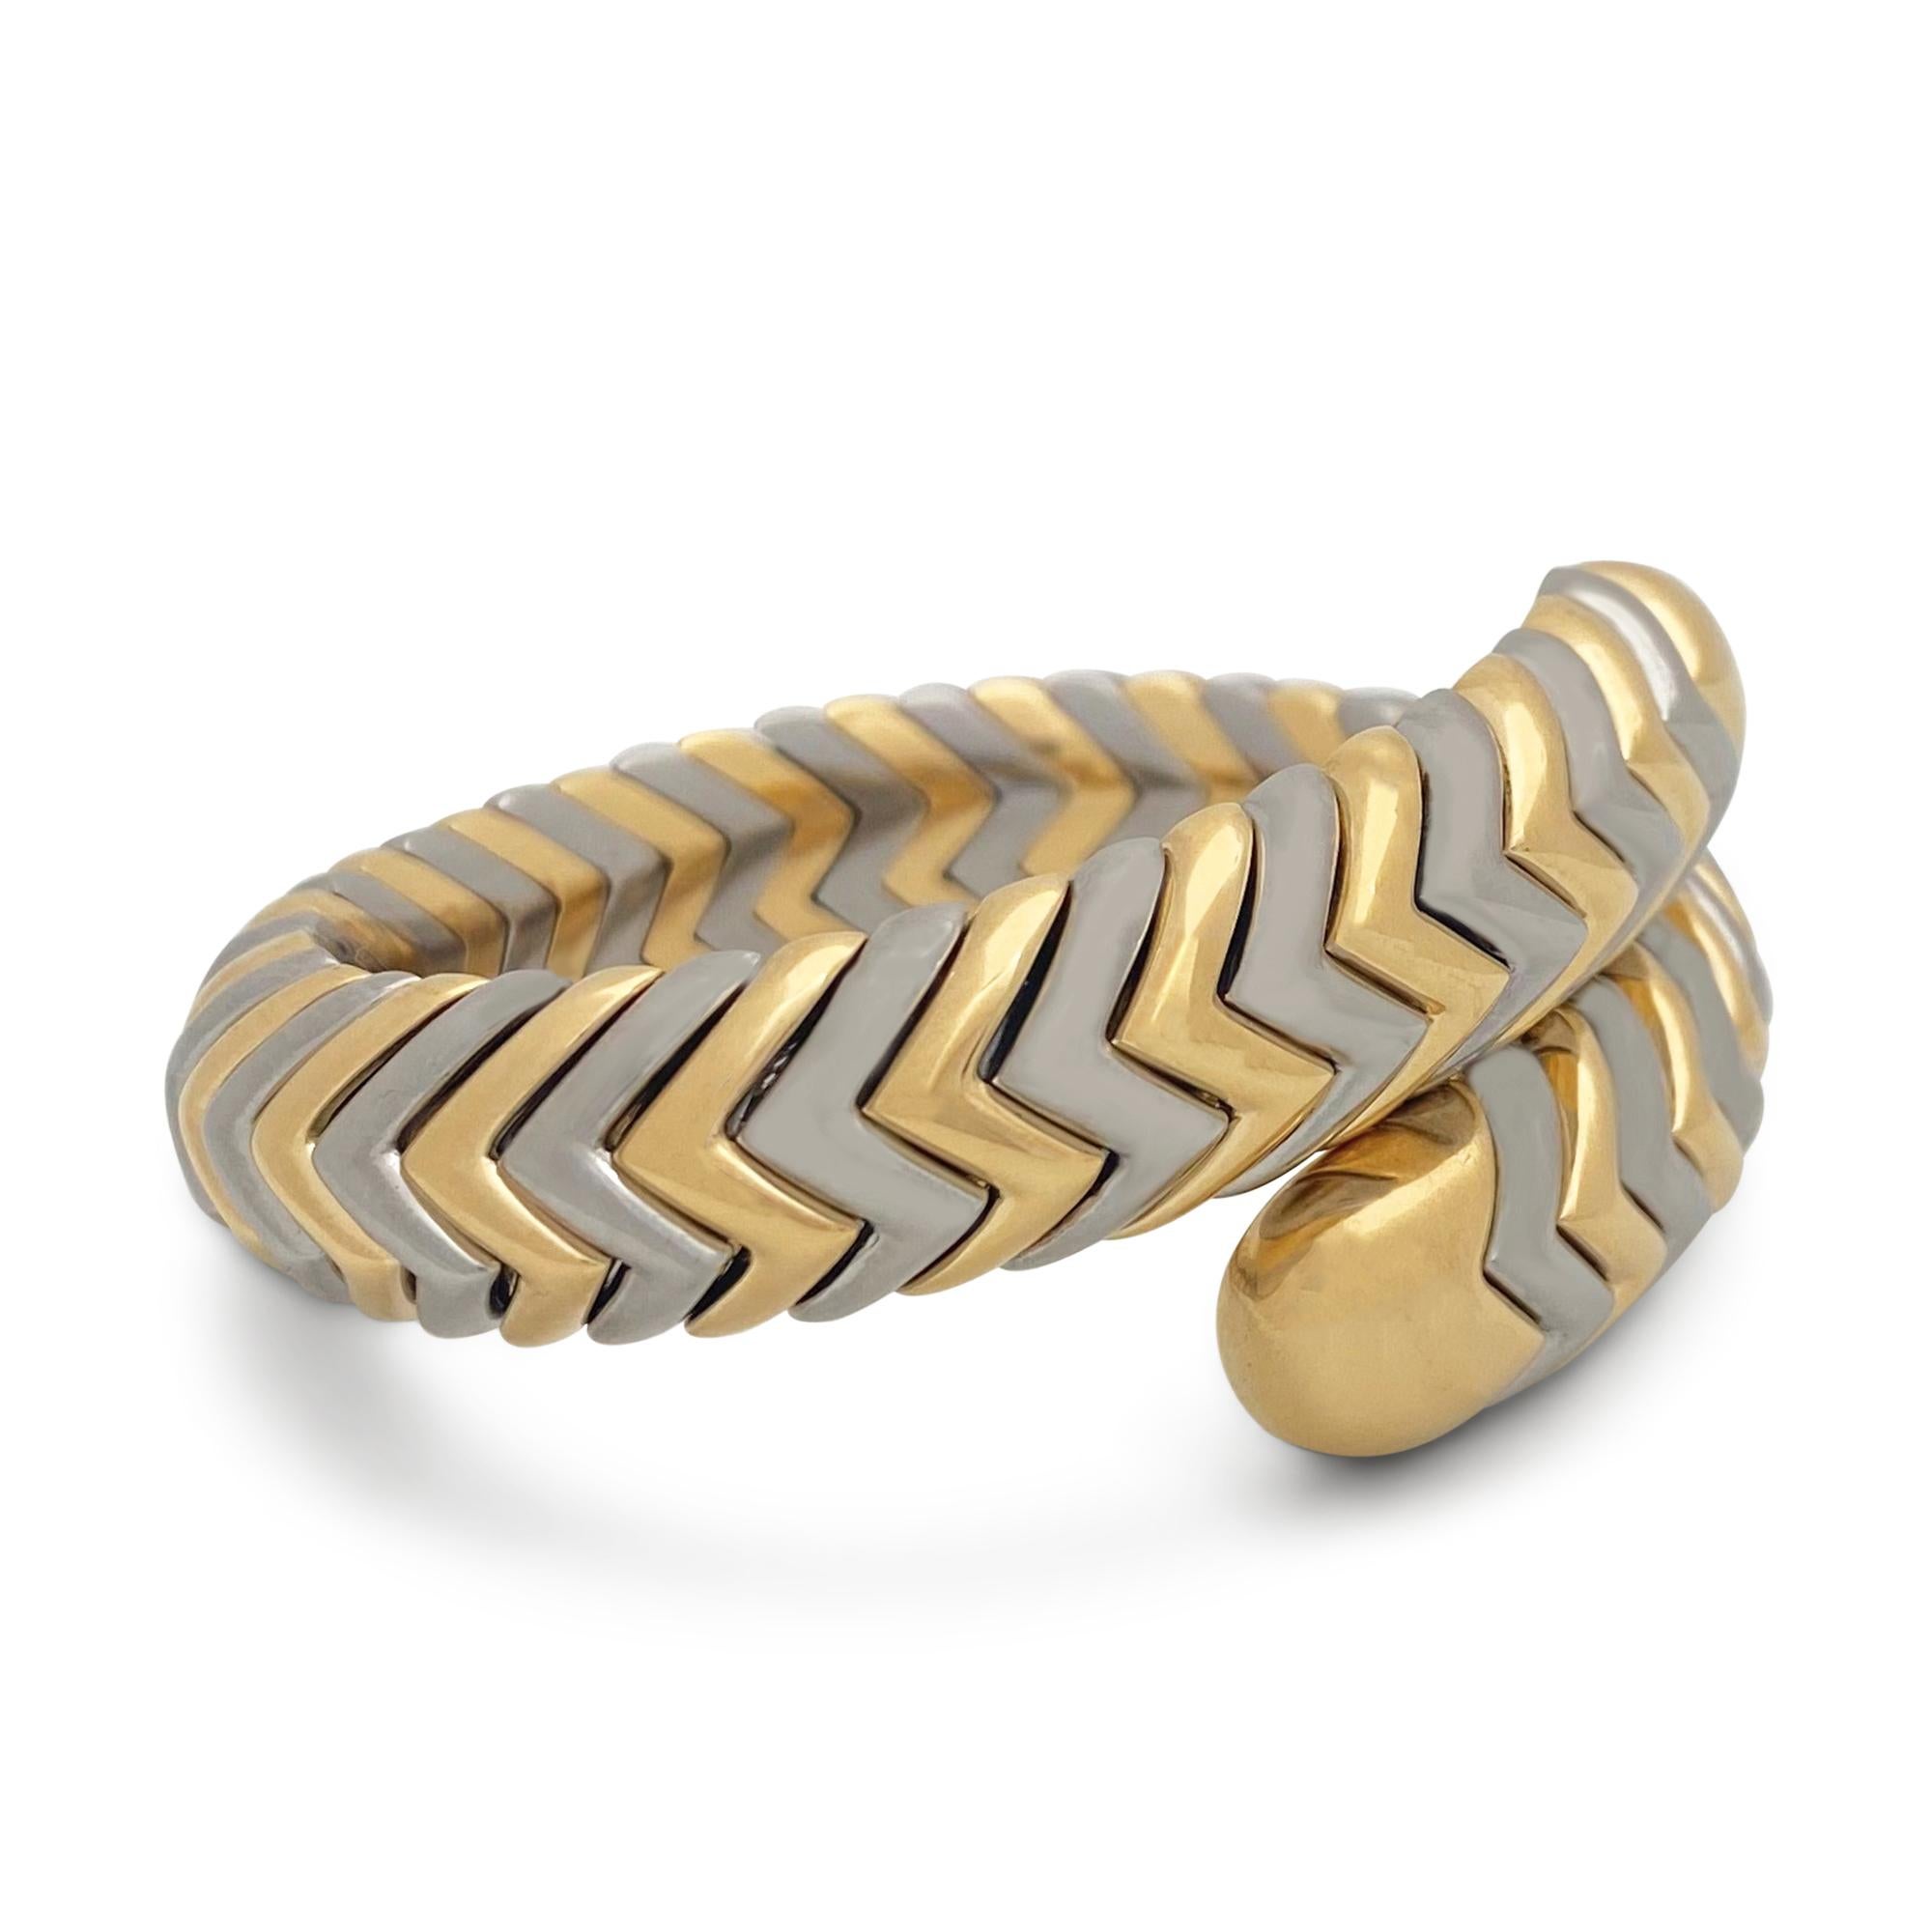 Authentic Bvlgari Spiga bracelet crafted in 8 karat yellow gold and stainless steel. The iconic Spiga pattern is represented here in a two row bypass design. The internal circumference is 5 1/2 inches and the bracelet will fit up to a 6-inch wrist. 